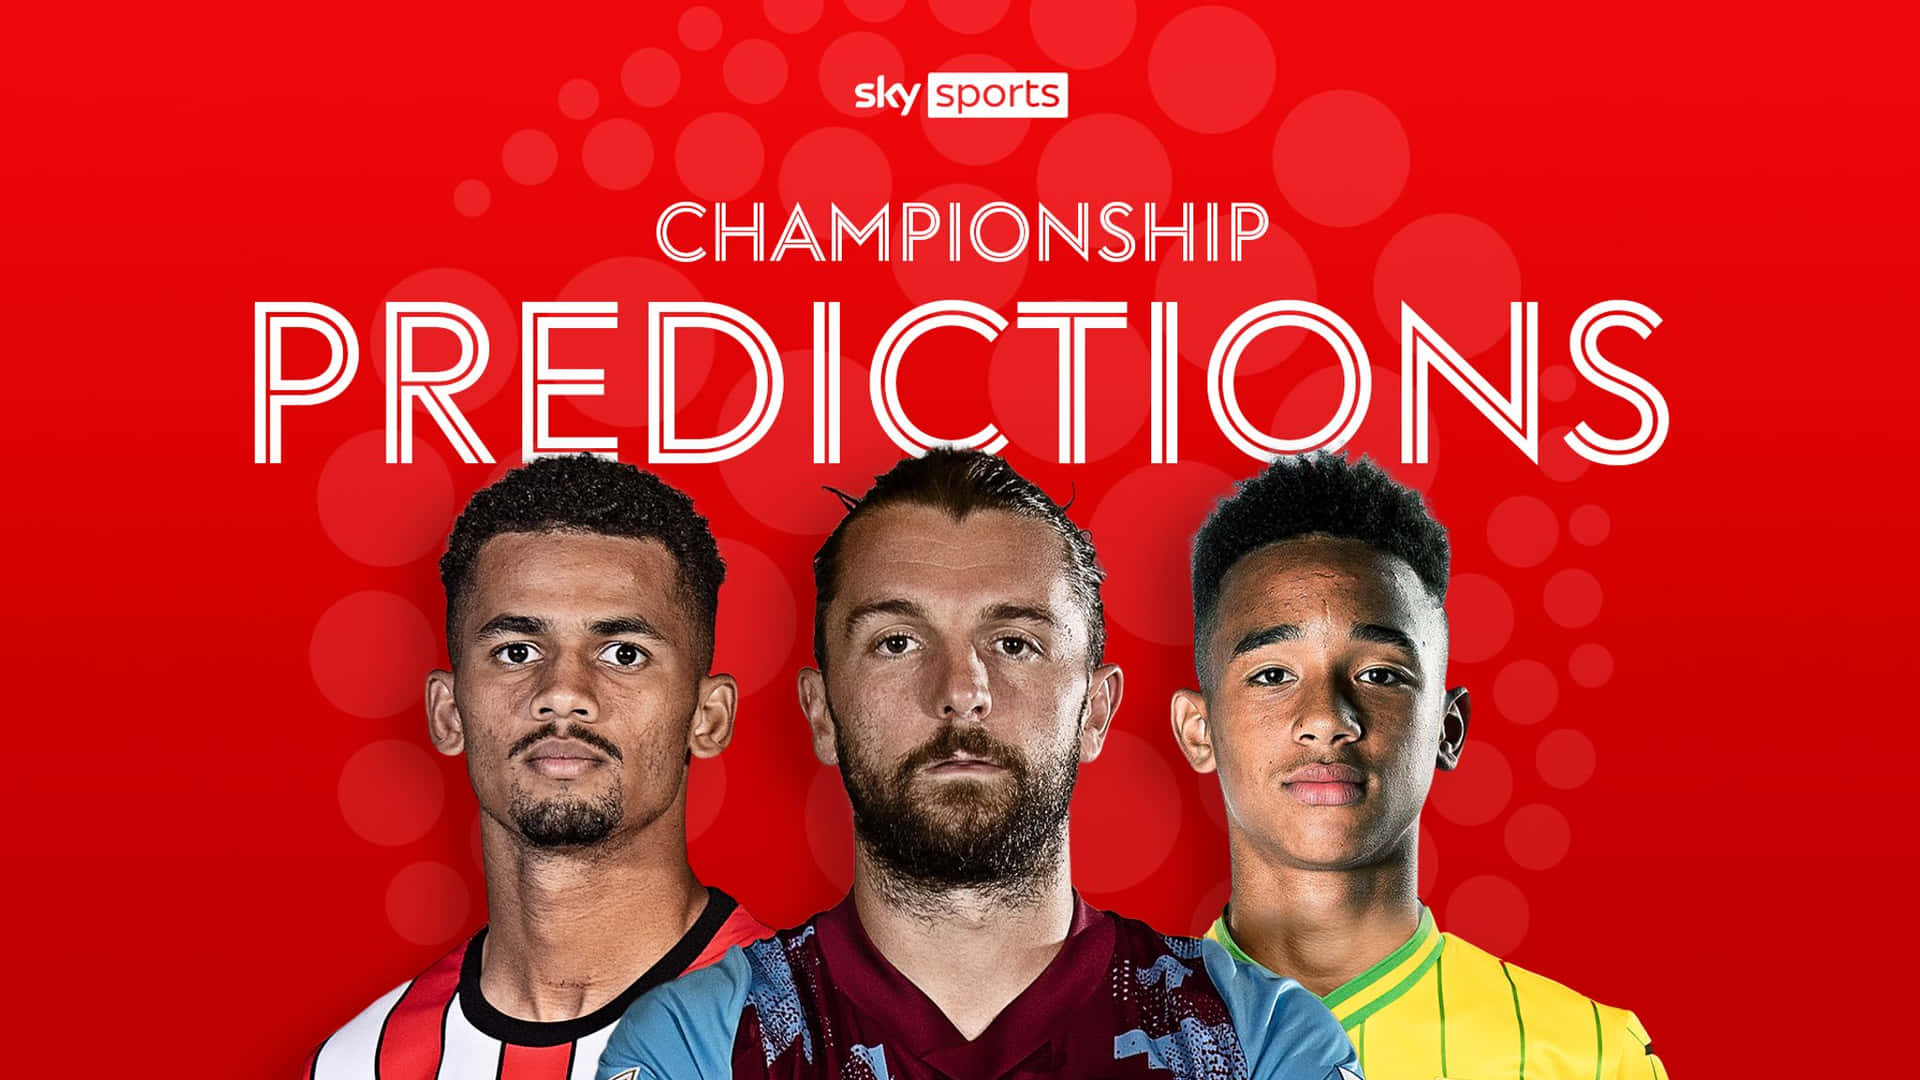 The Title Of The Championship Predictions Wallpaper